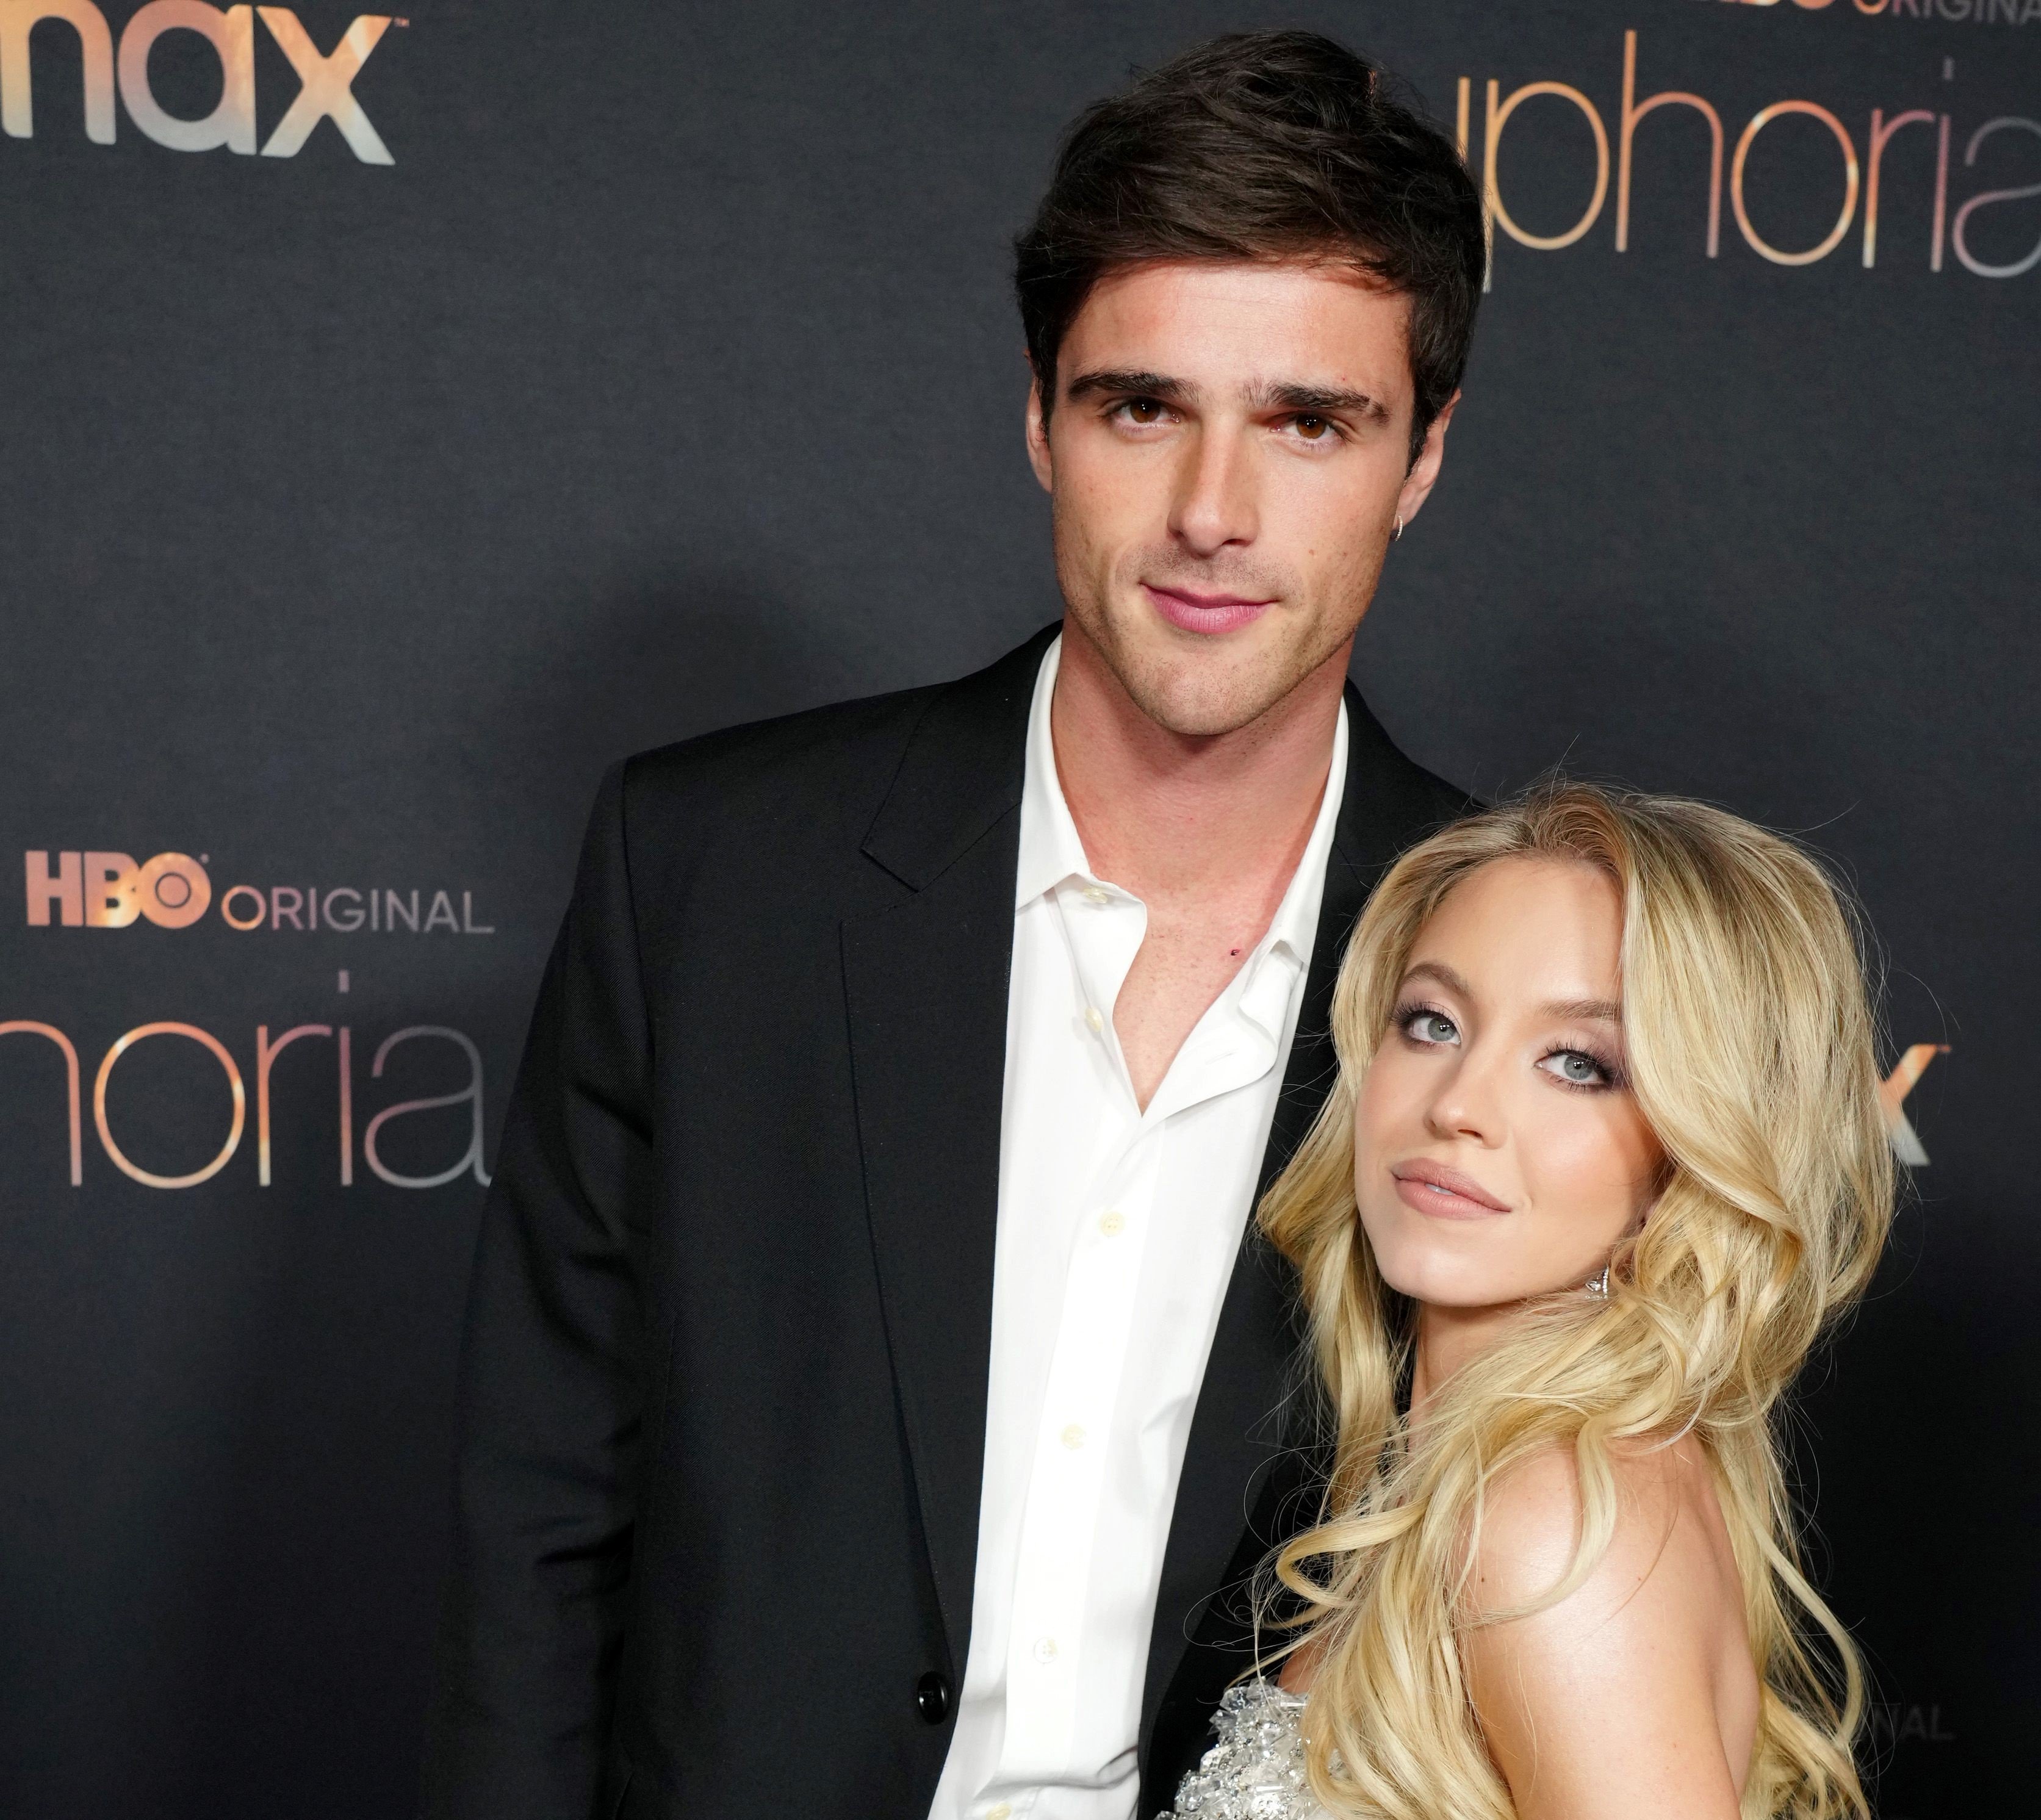 Jacob Elordi and Sydney Sweeney at the premiere for season 2 of 'Euphoria'